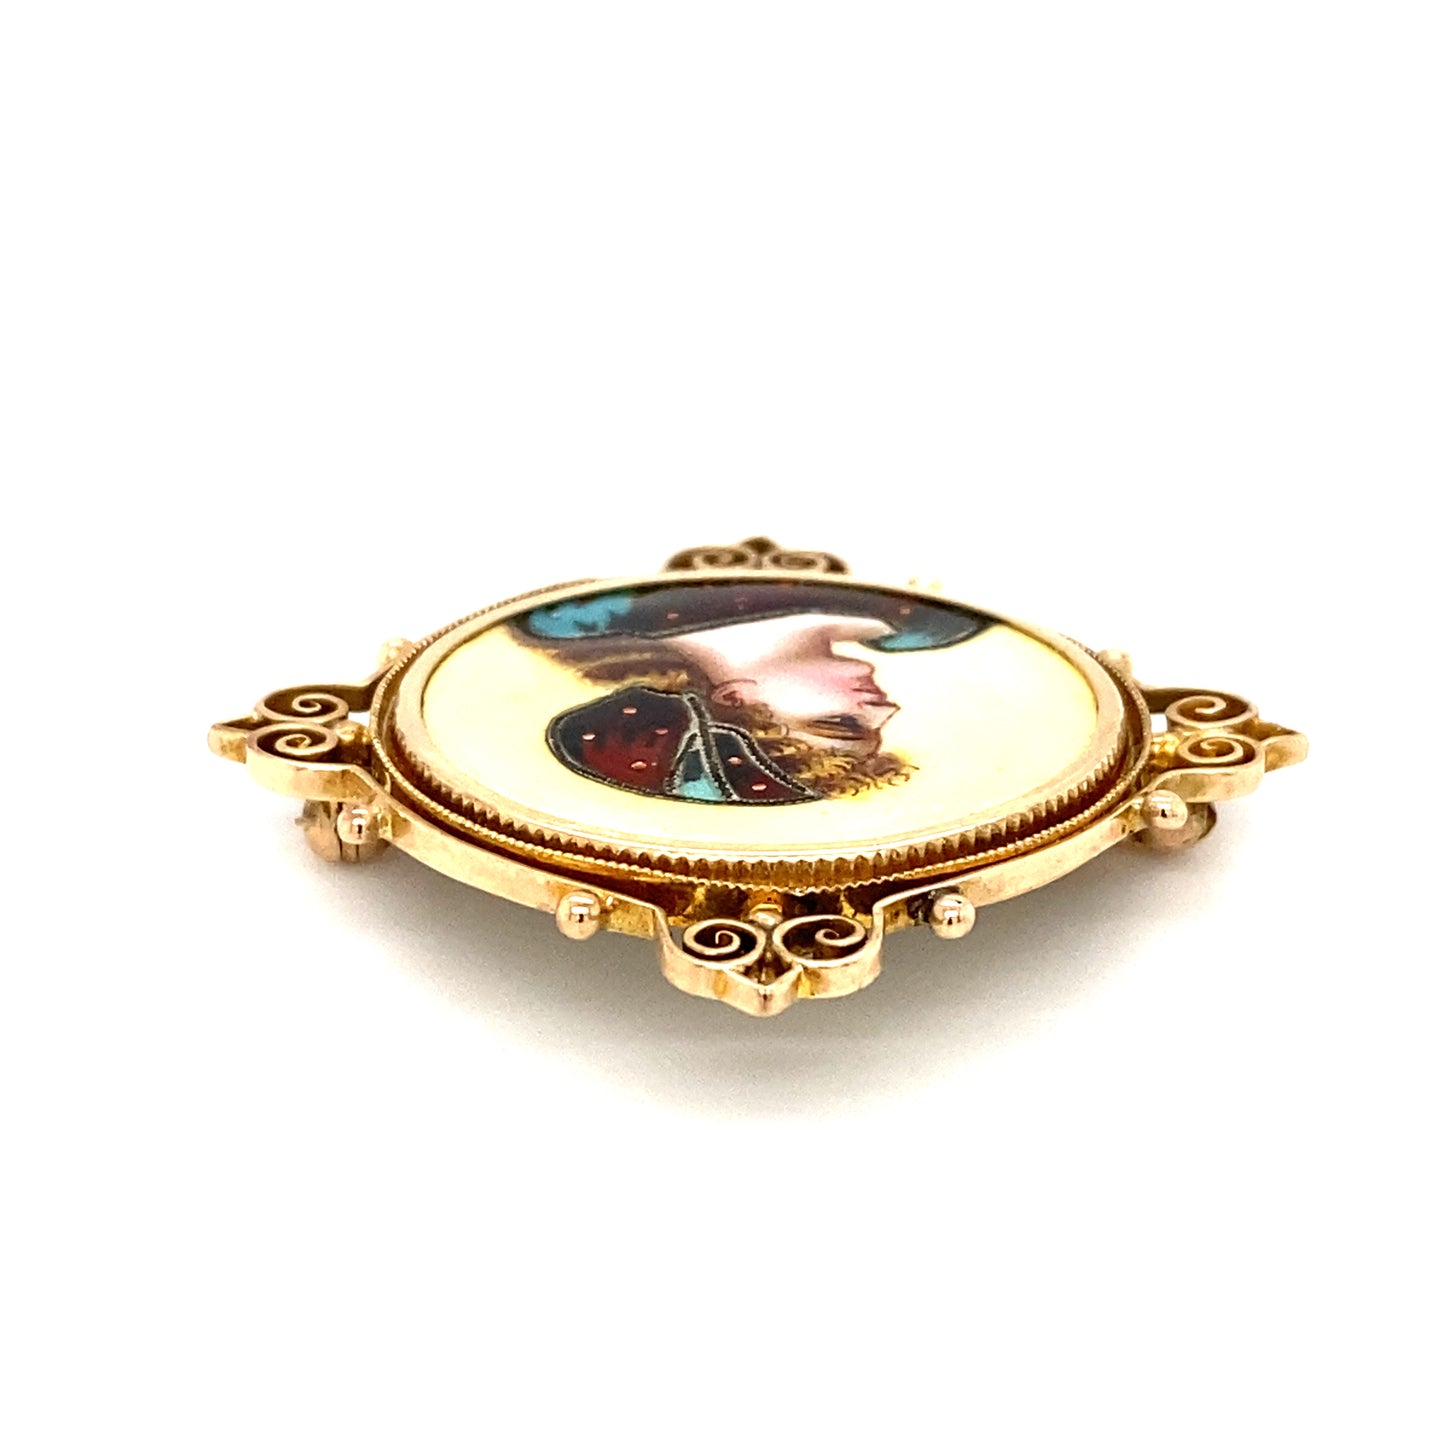 Circa 1930s Hand-Painted Porcelain Portrait Brooch in 10K Gold